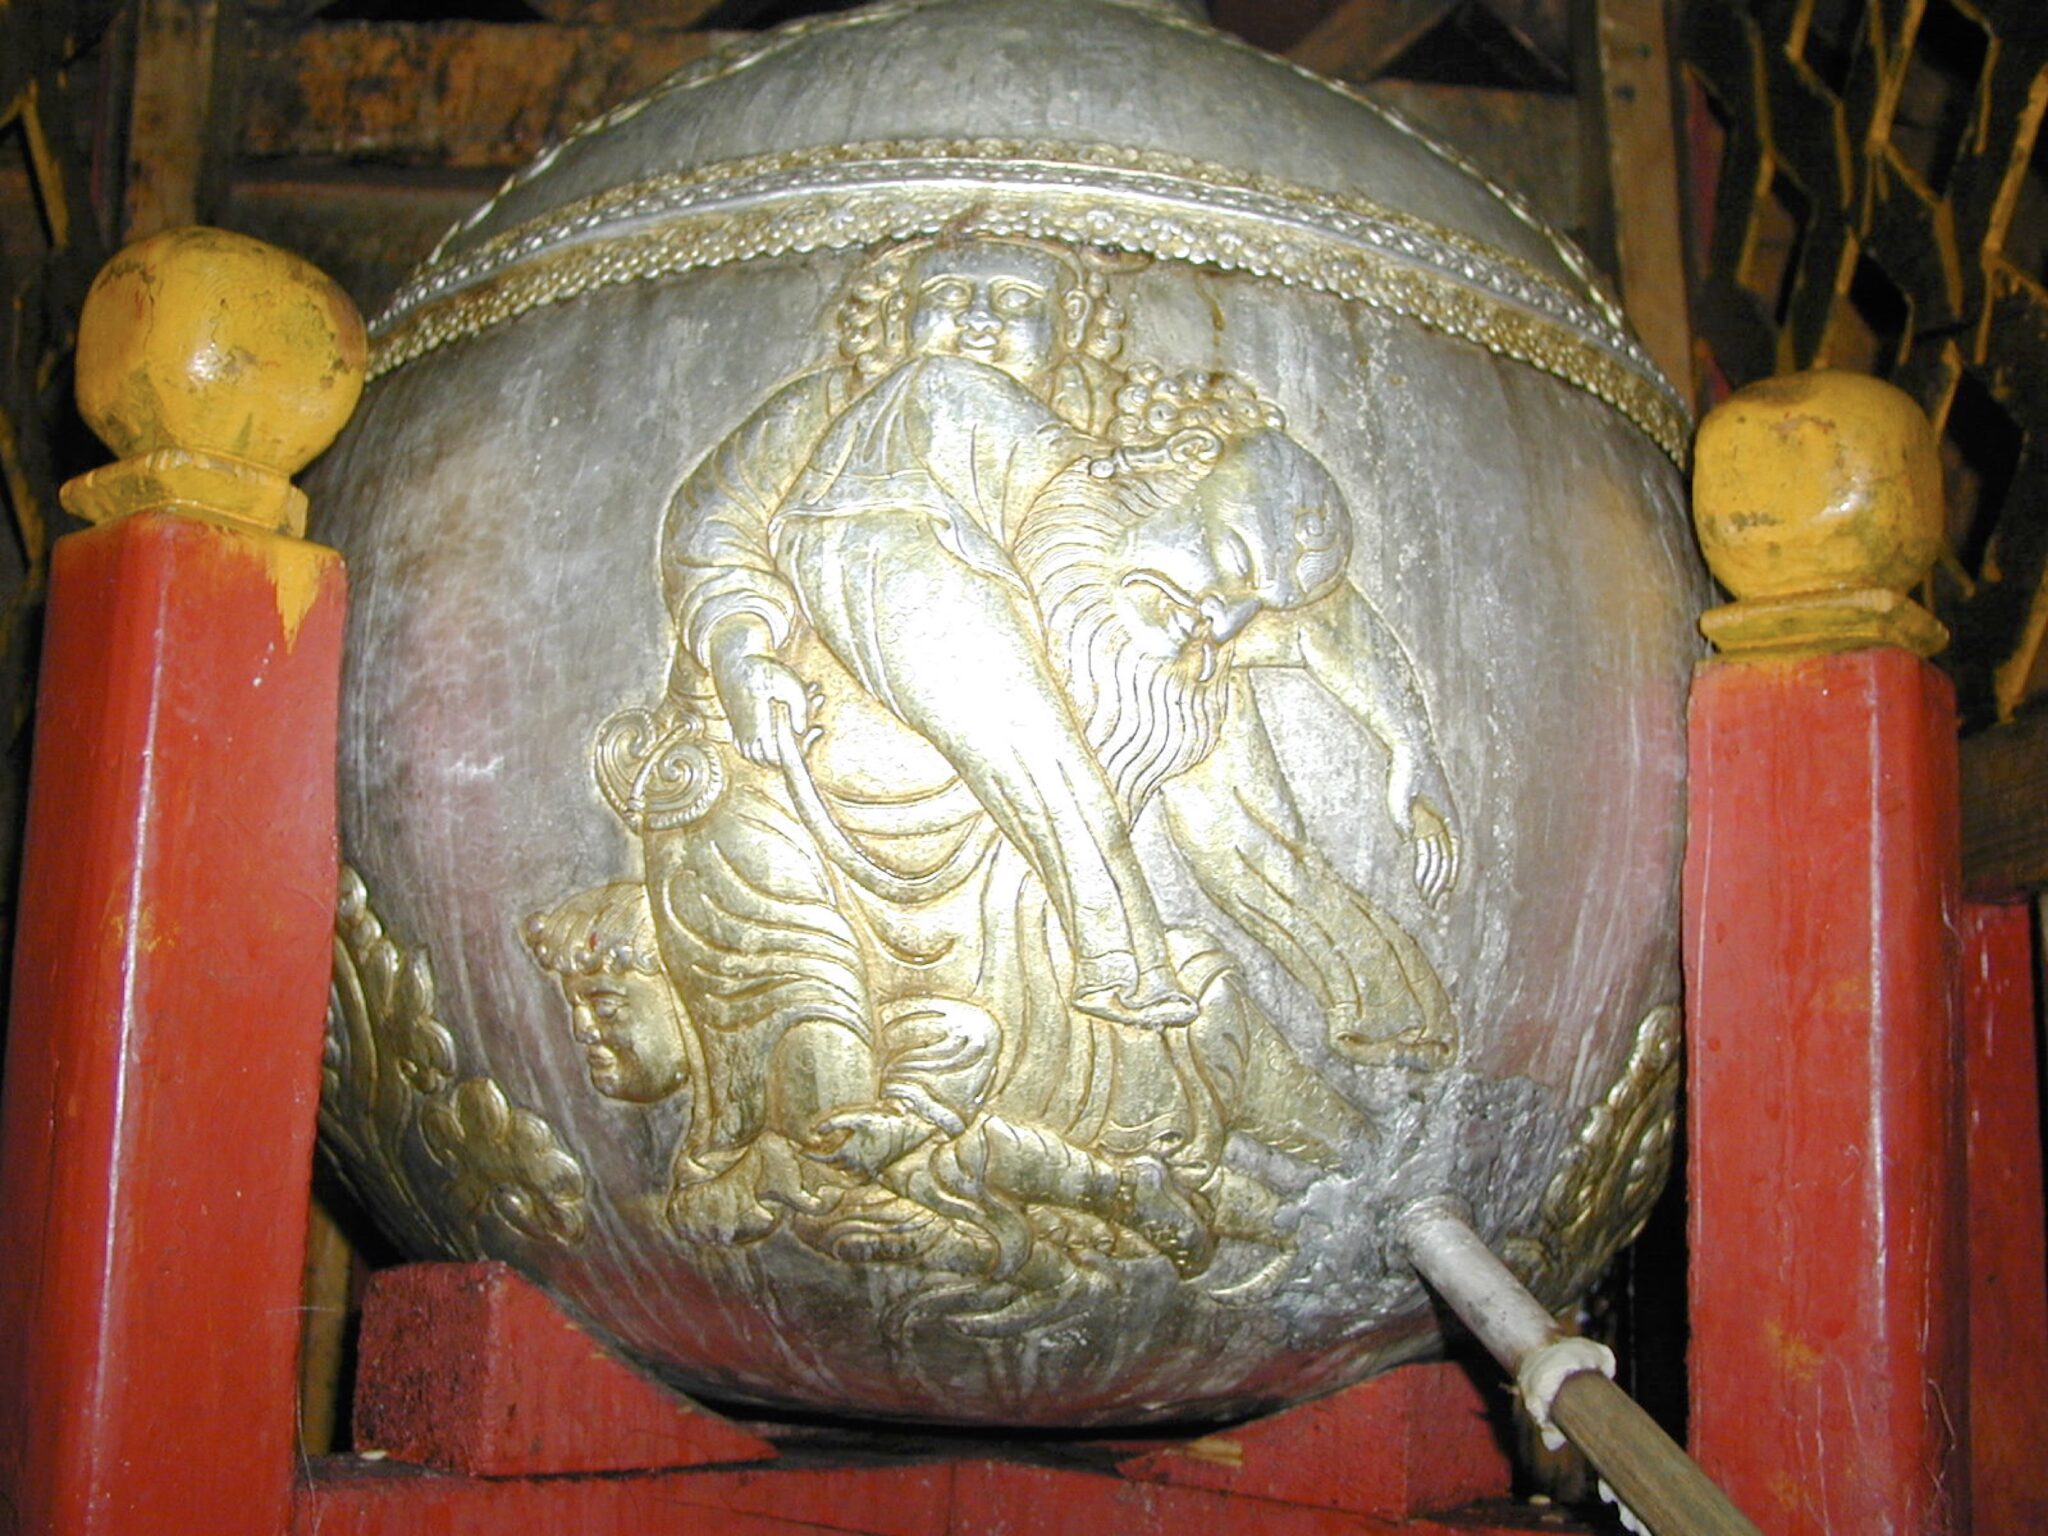 Close view of bottom hemisphere of spherical silver vessel decorated with trio of men in inebriated state